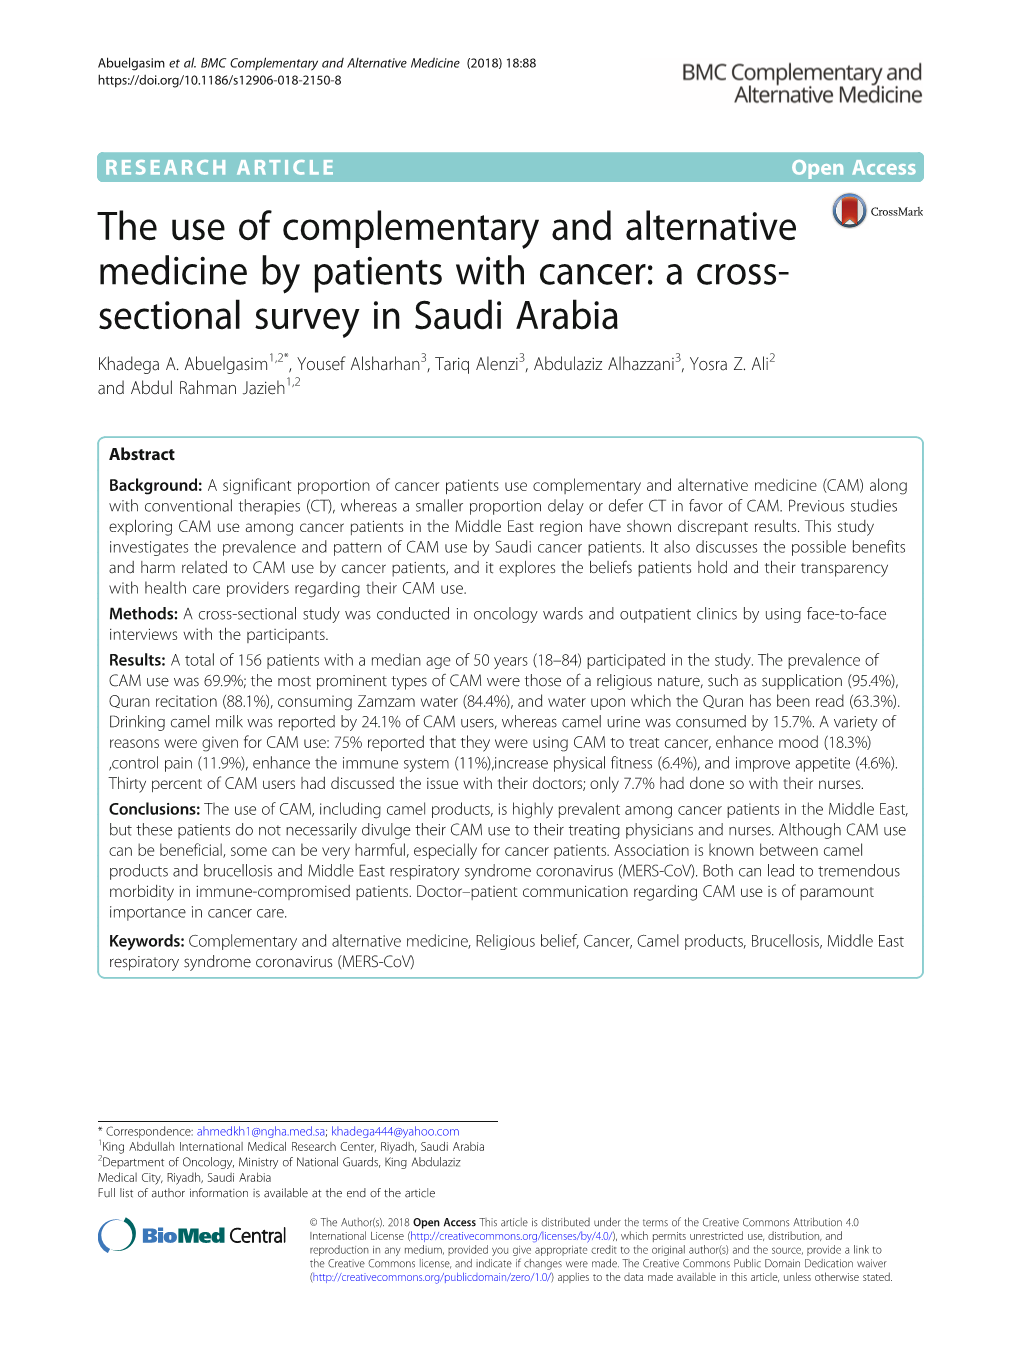 The Use of Complementary and Alternative Medicine by Patients with Cancer: a Cross- Sectional Survey in Saudi Arabia Khadega A